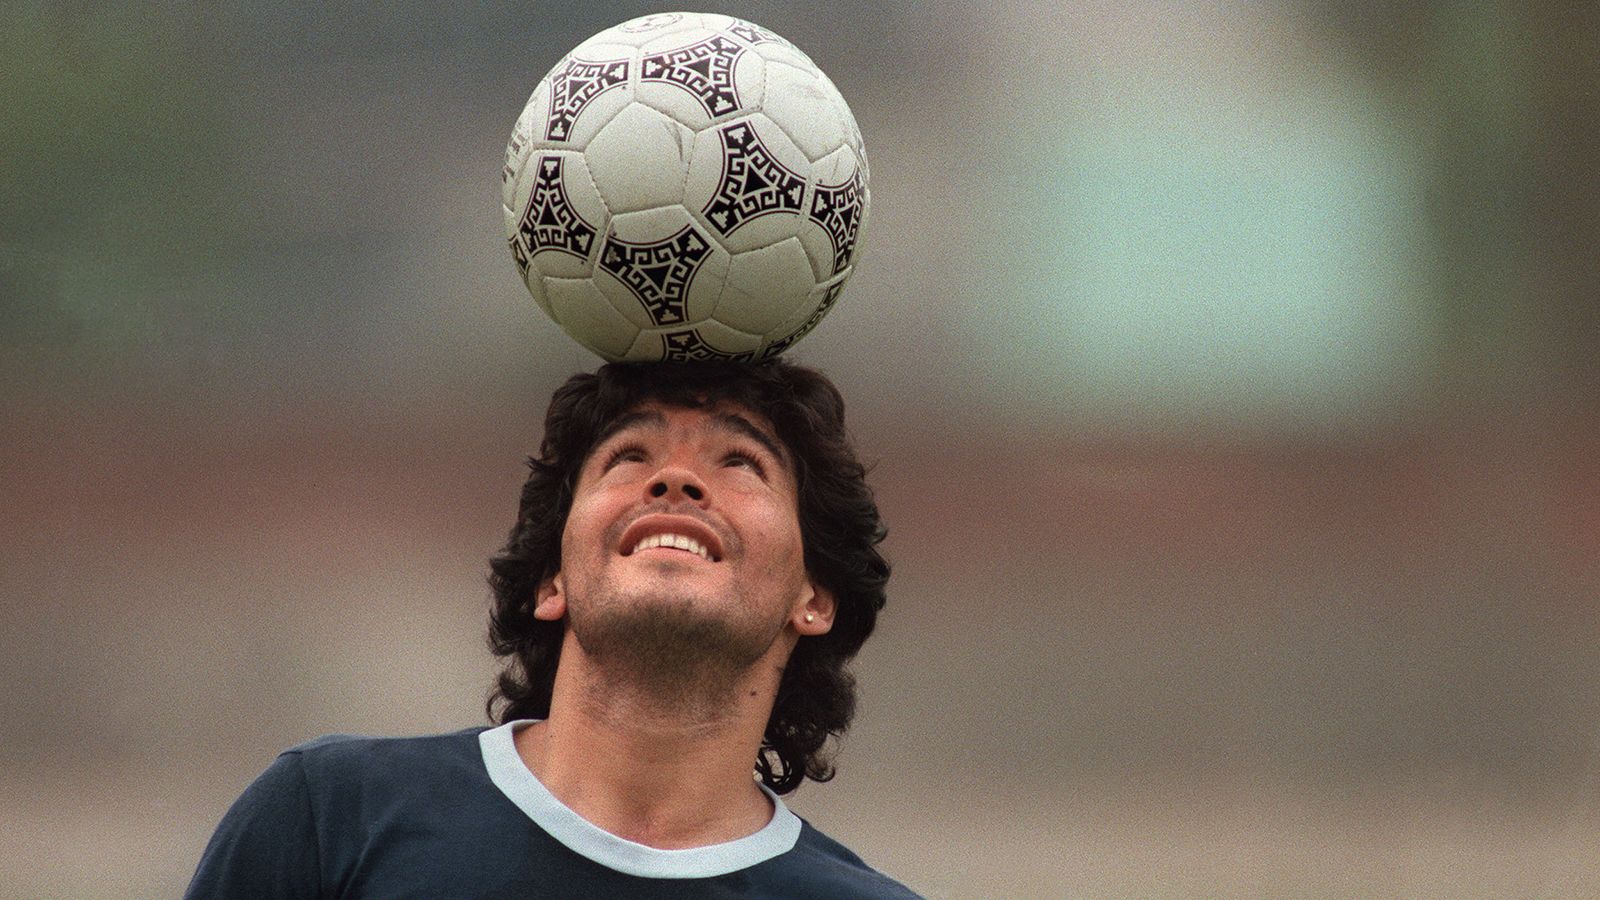 After Maradona's death, Sportsmail asks who is football's greatest player?